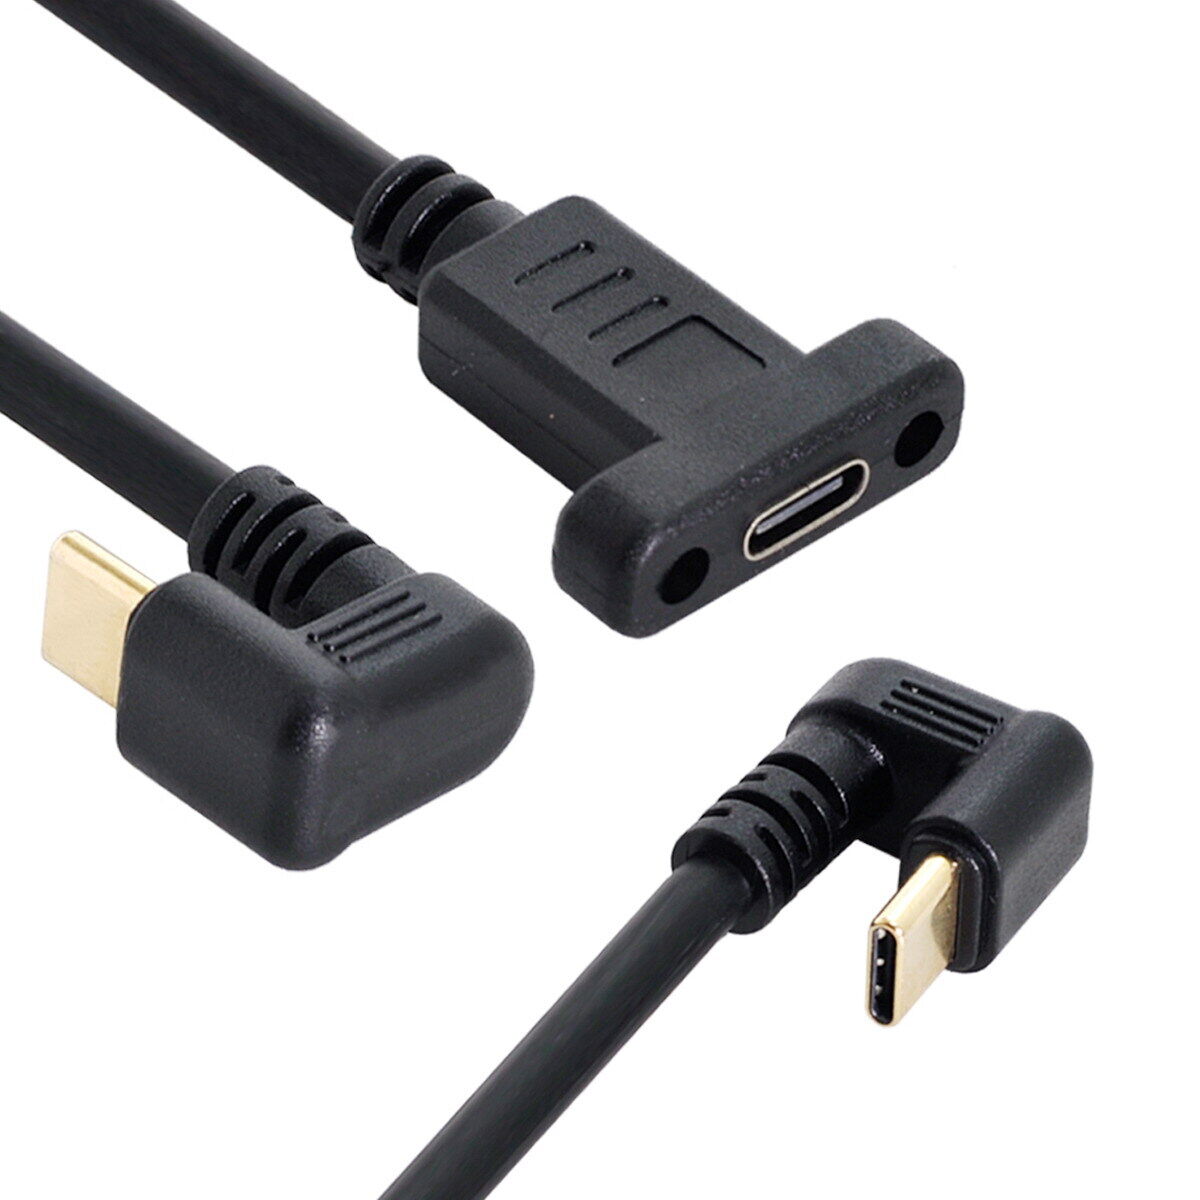 Cablecy USB-C USB 3.1 Type C U Shape Back Angled Male to Female Cable 180 Degree